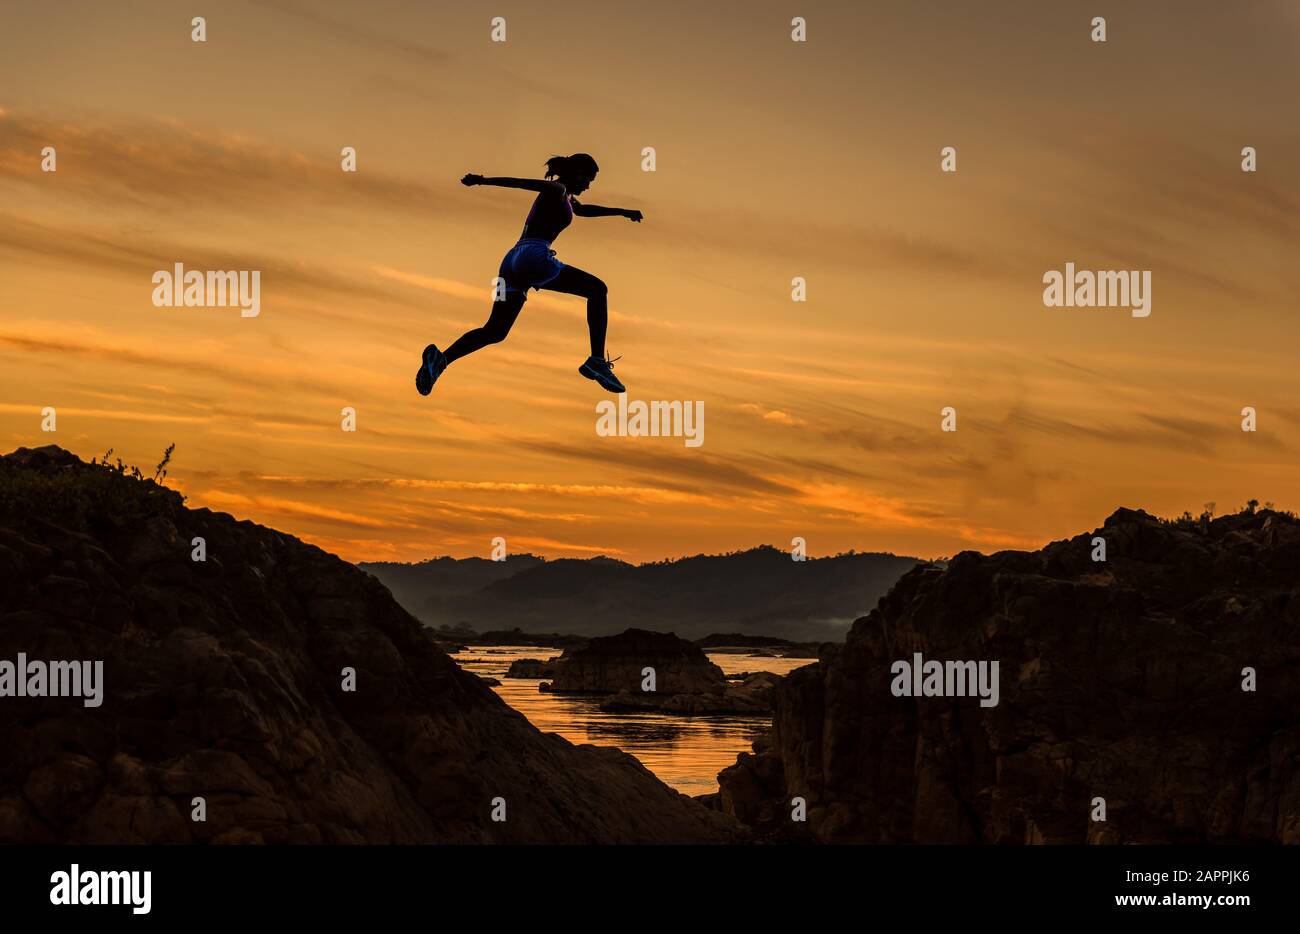 Woman jump through the gap between hill.woman jumping over cliff on sunset  background,Business concept idea Stock Photo - Alamy